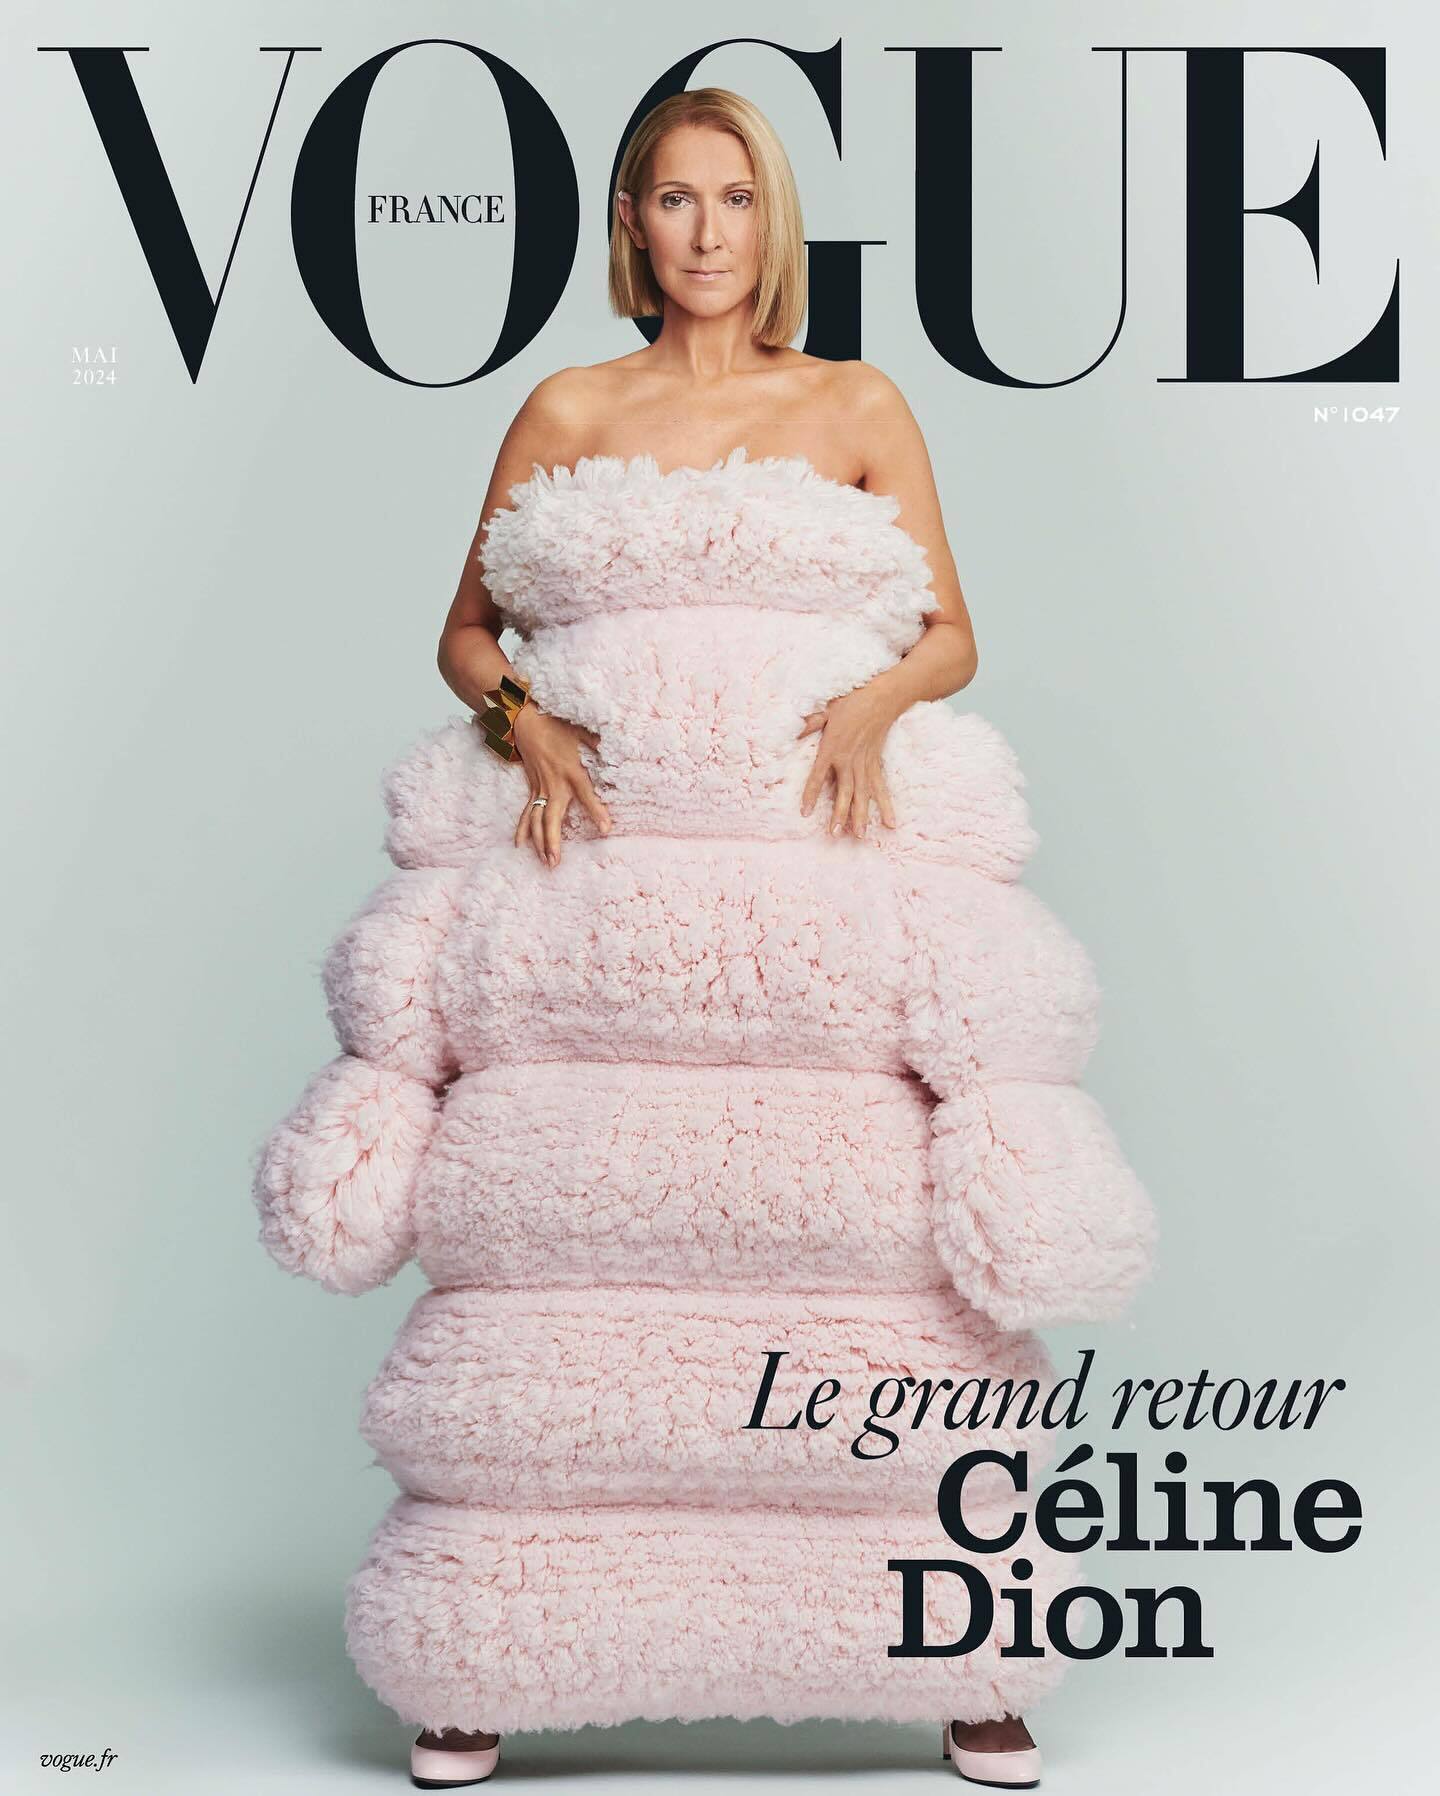 Seriously ill Celine Dion appeared on the cover of Vogue in a soft ''cloud dress'' and without a bra